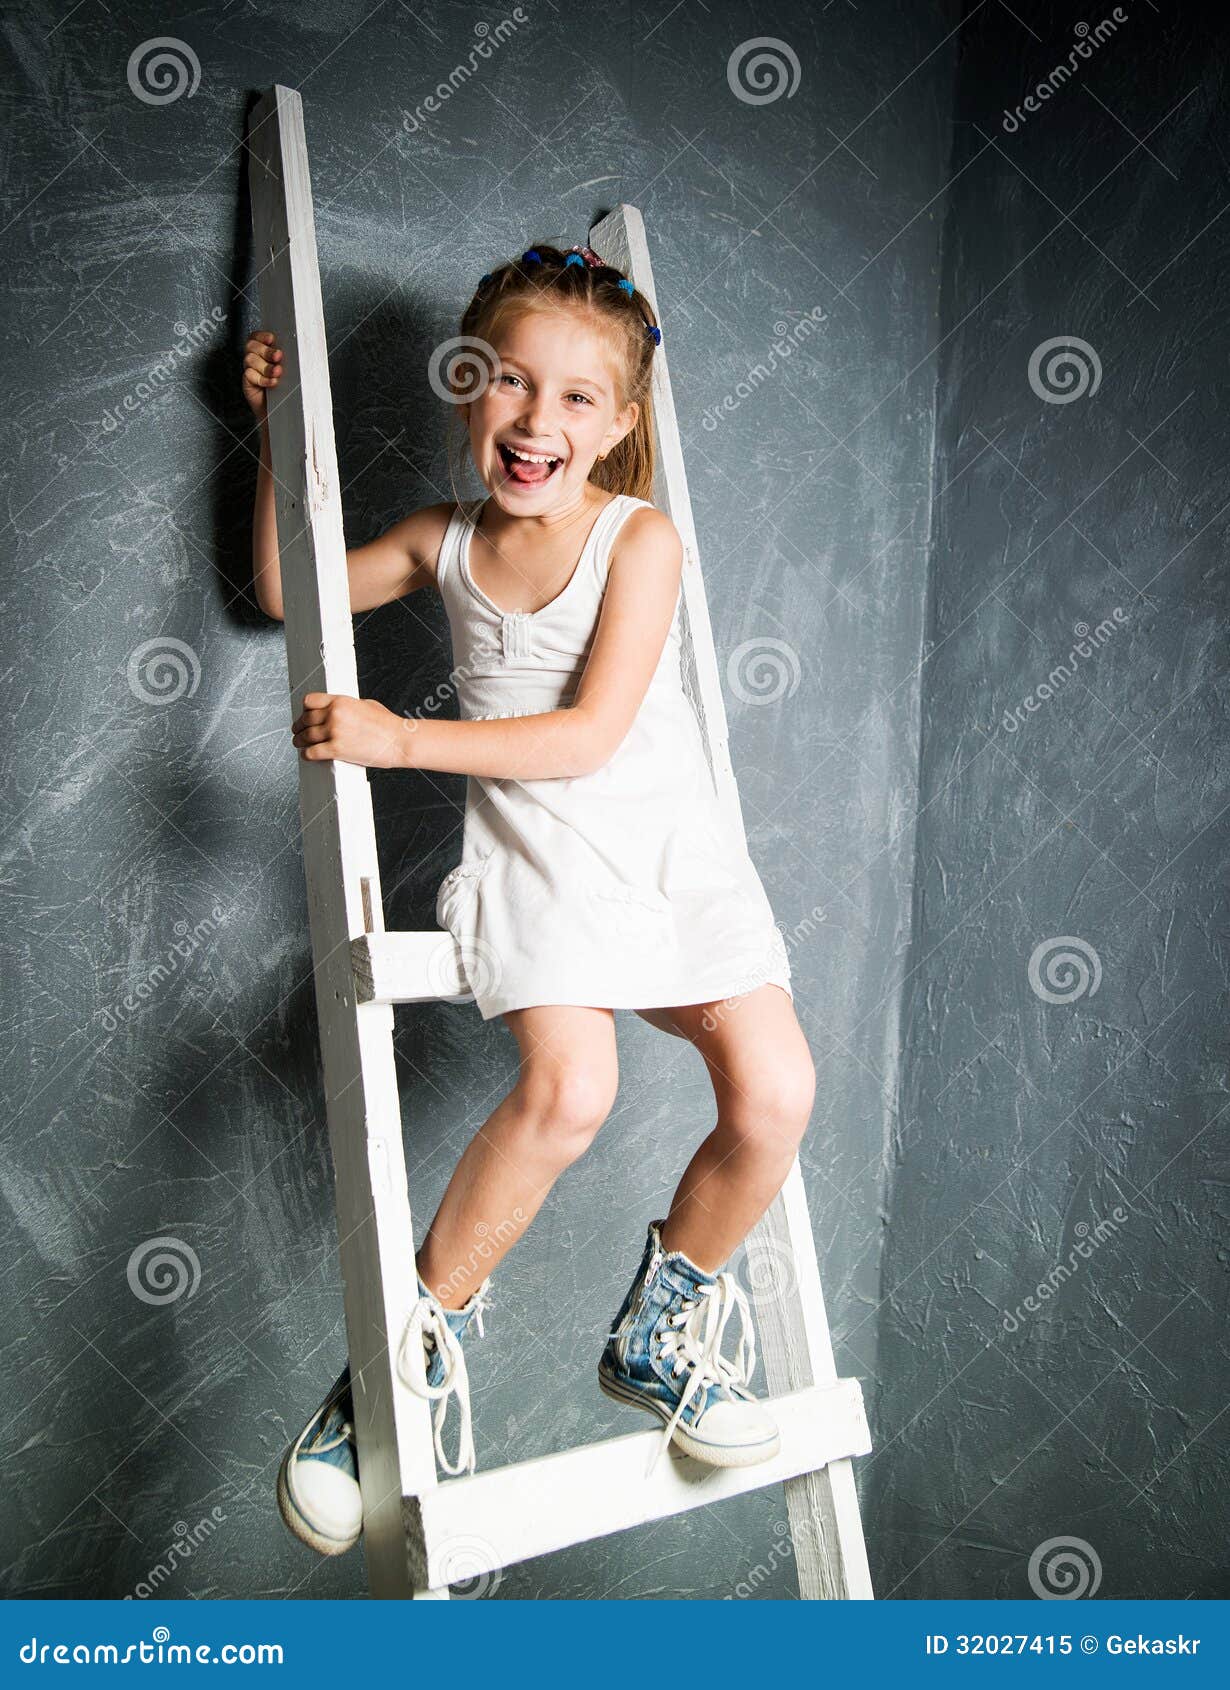 Little girl on stairs stock image. Image of girl, looking - 32027415